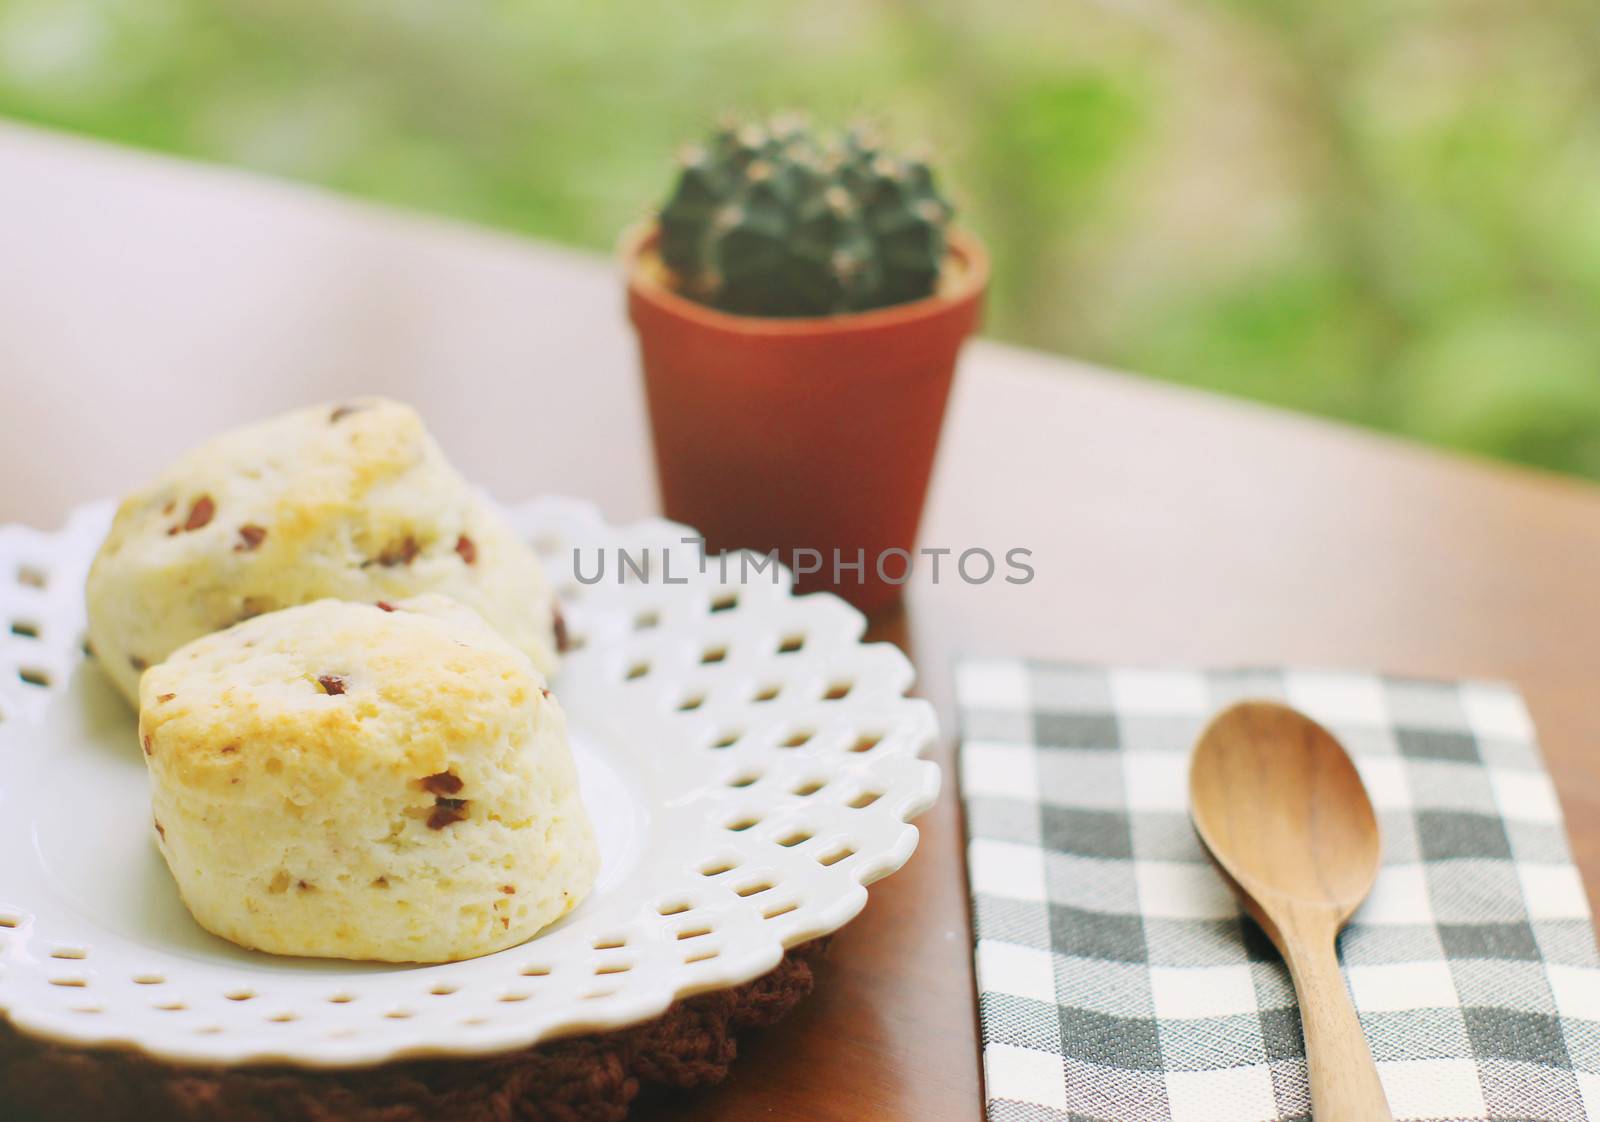 Homemade freshly baked scones with wooden spoon and cactus, retr by nuchylee